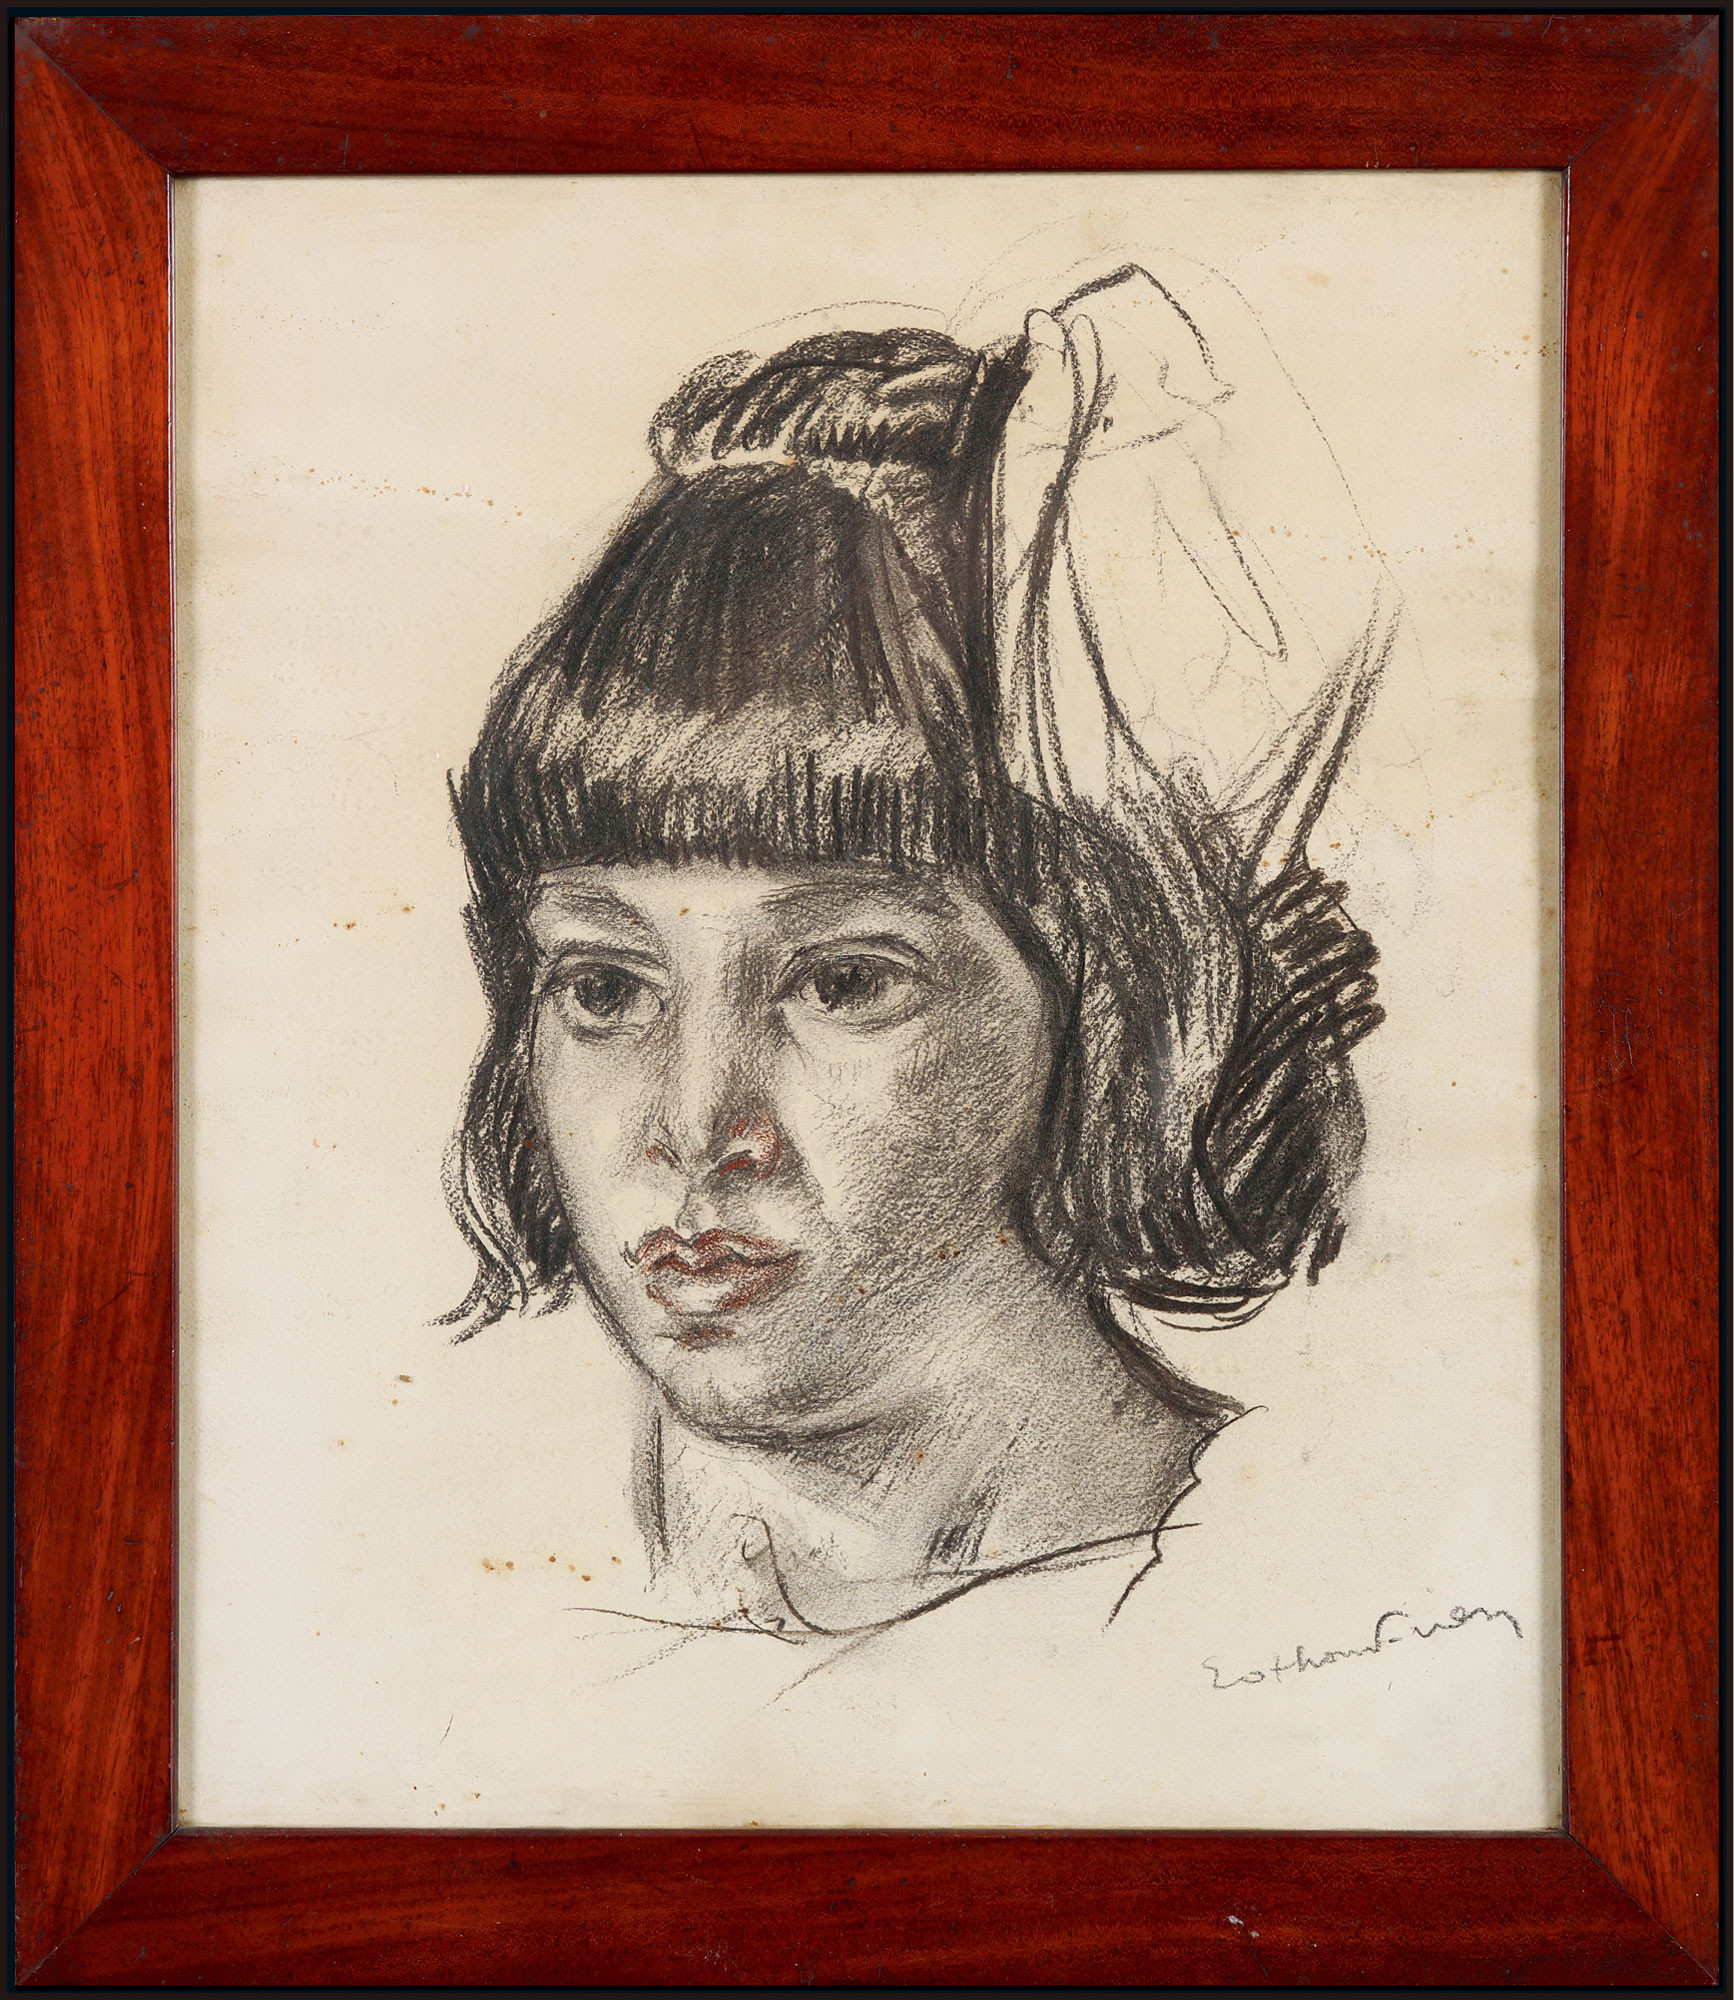 The “Portrait of a Daughter” by Emile Othon Friesz, a famous French Fauvist painter and mentor of Zao Wou-ki and Wu Guanzhong, with certificate